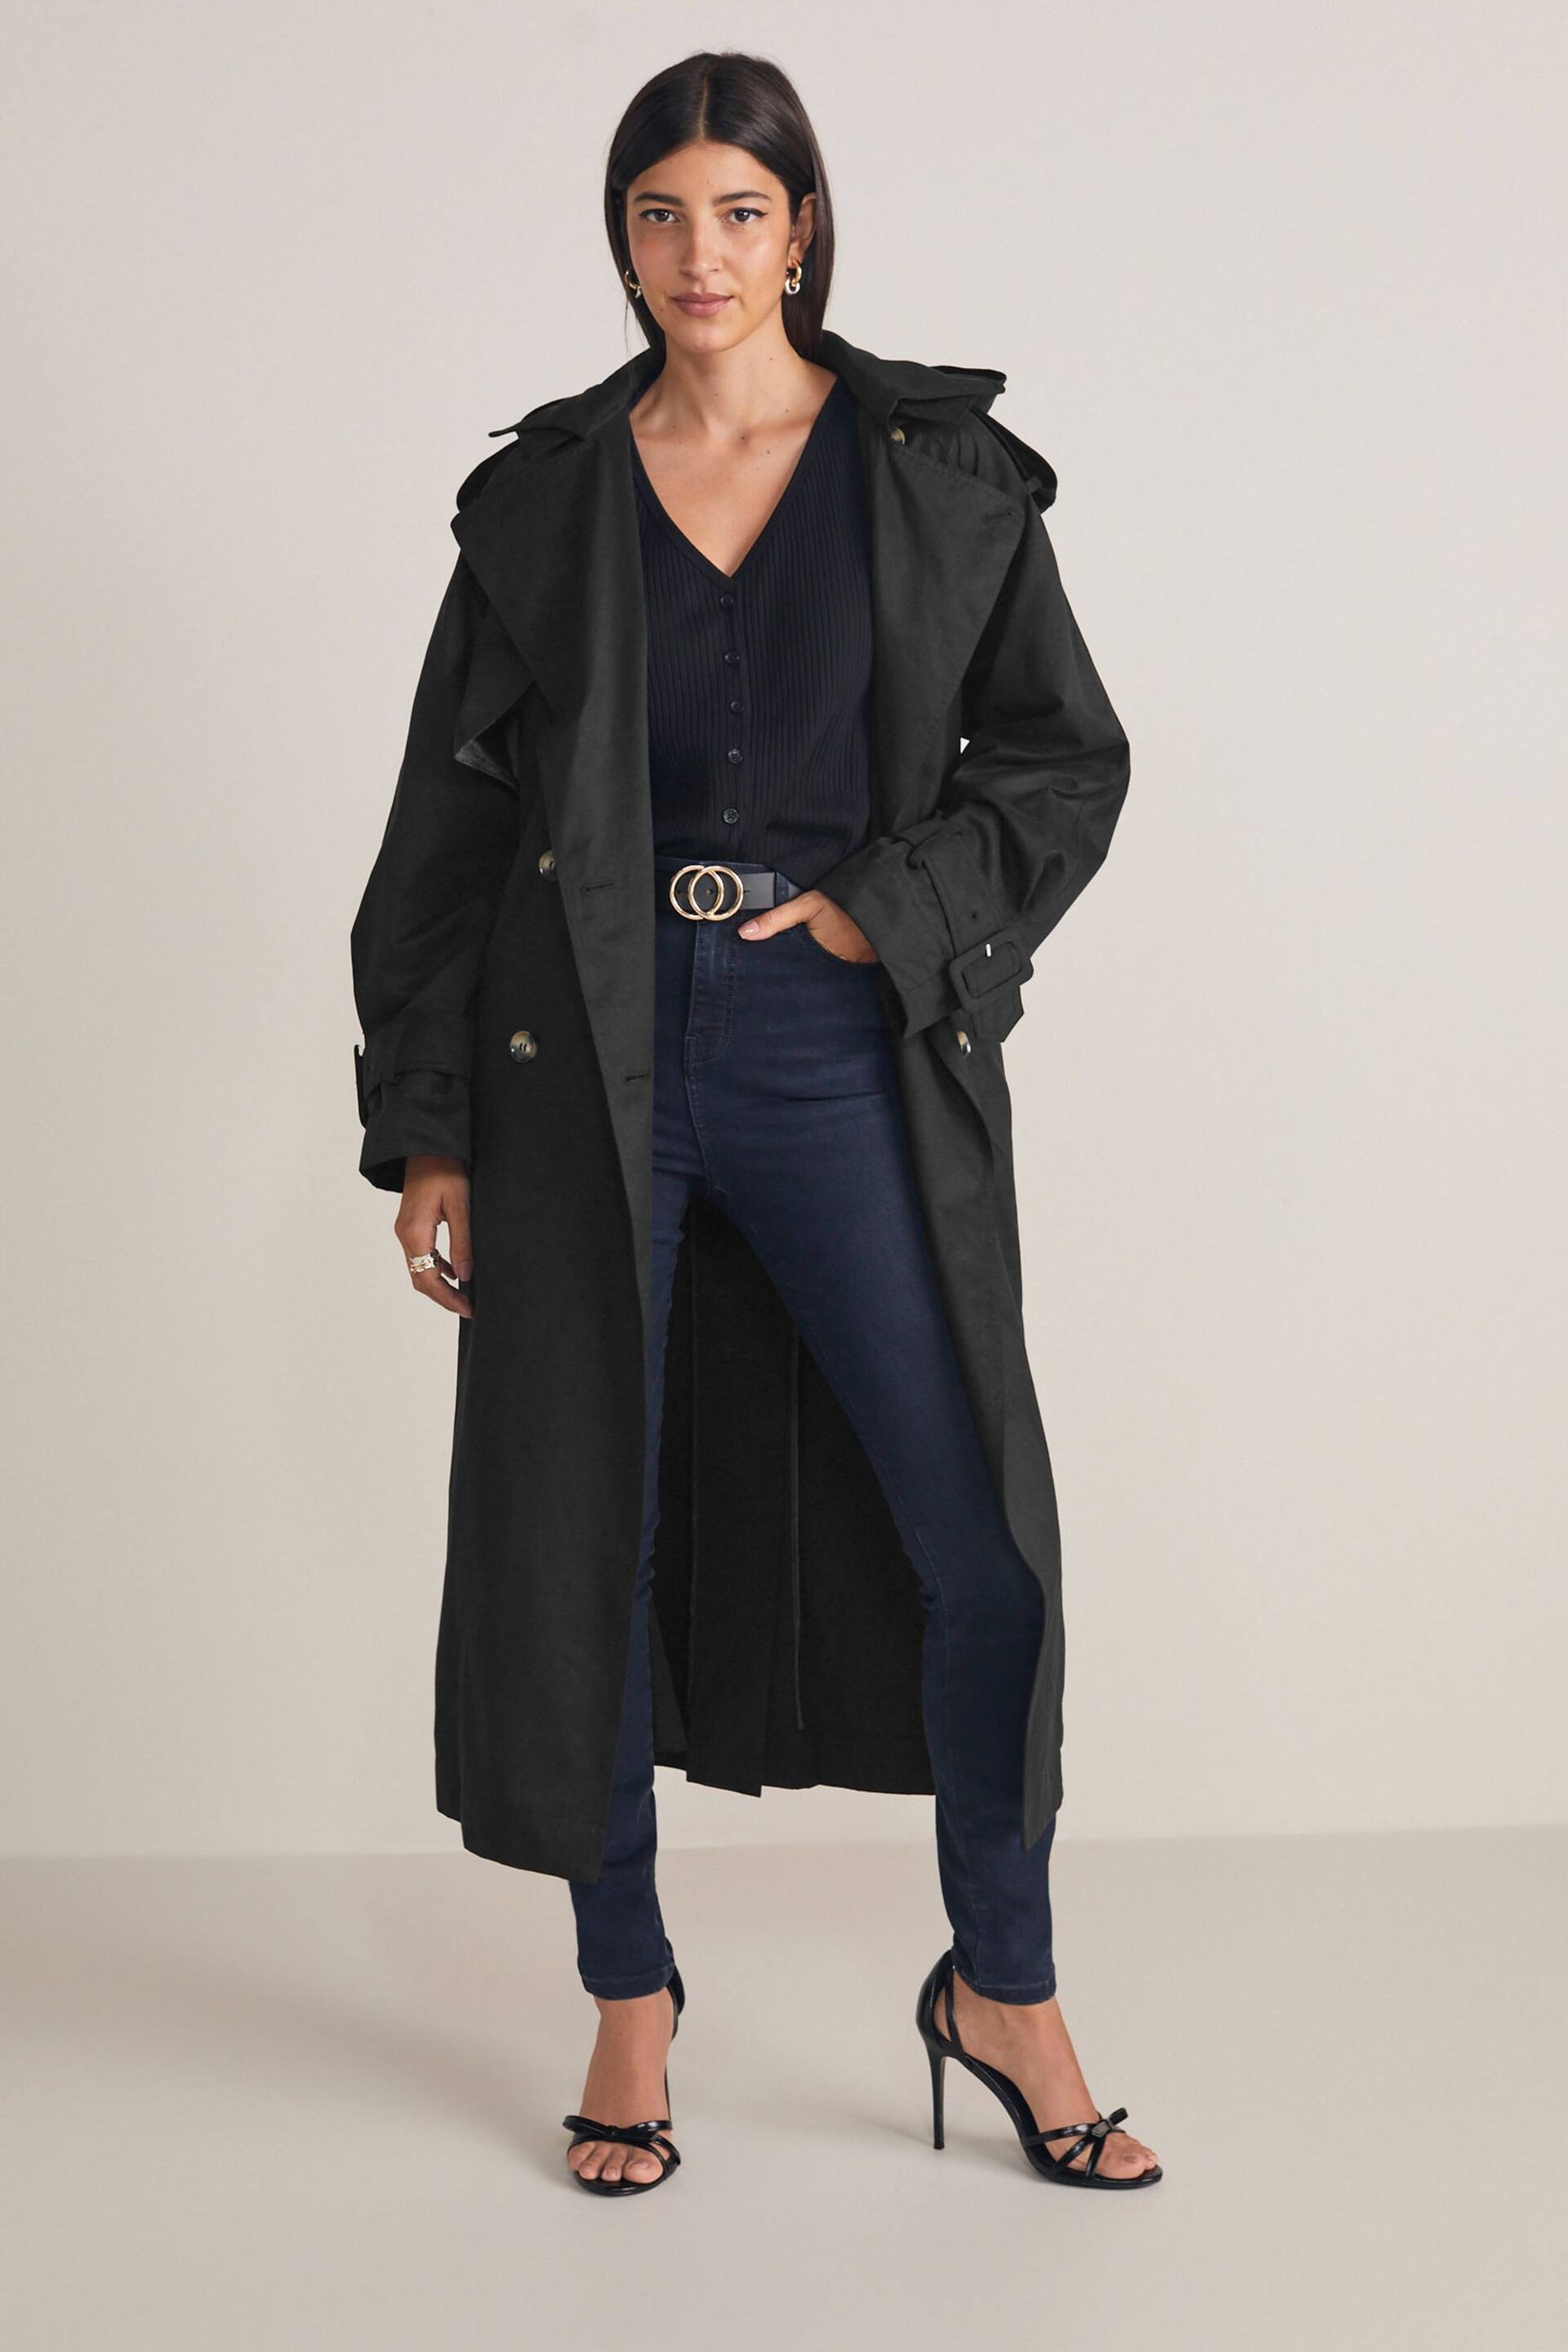 Black Belted Trench Coat - Image 1 of 9